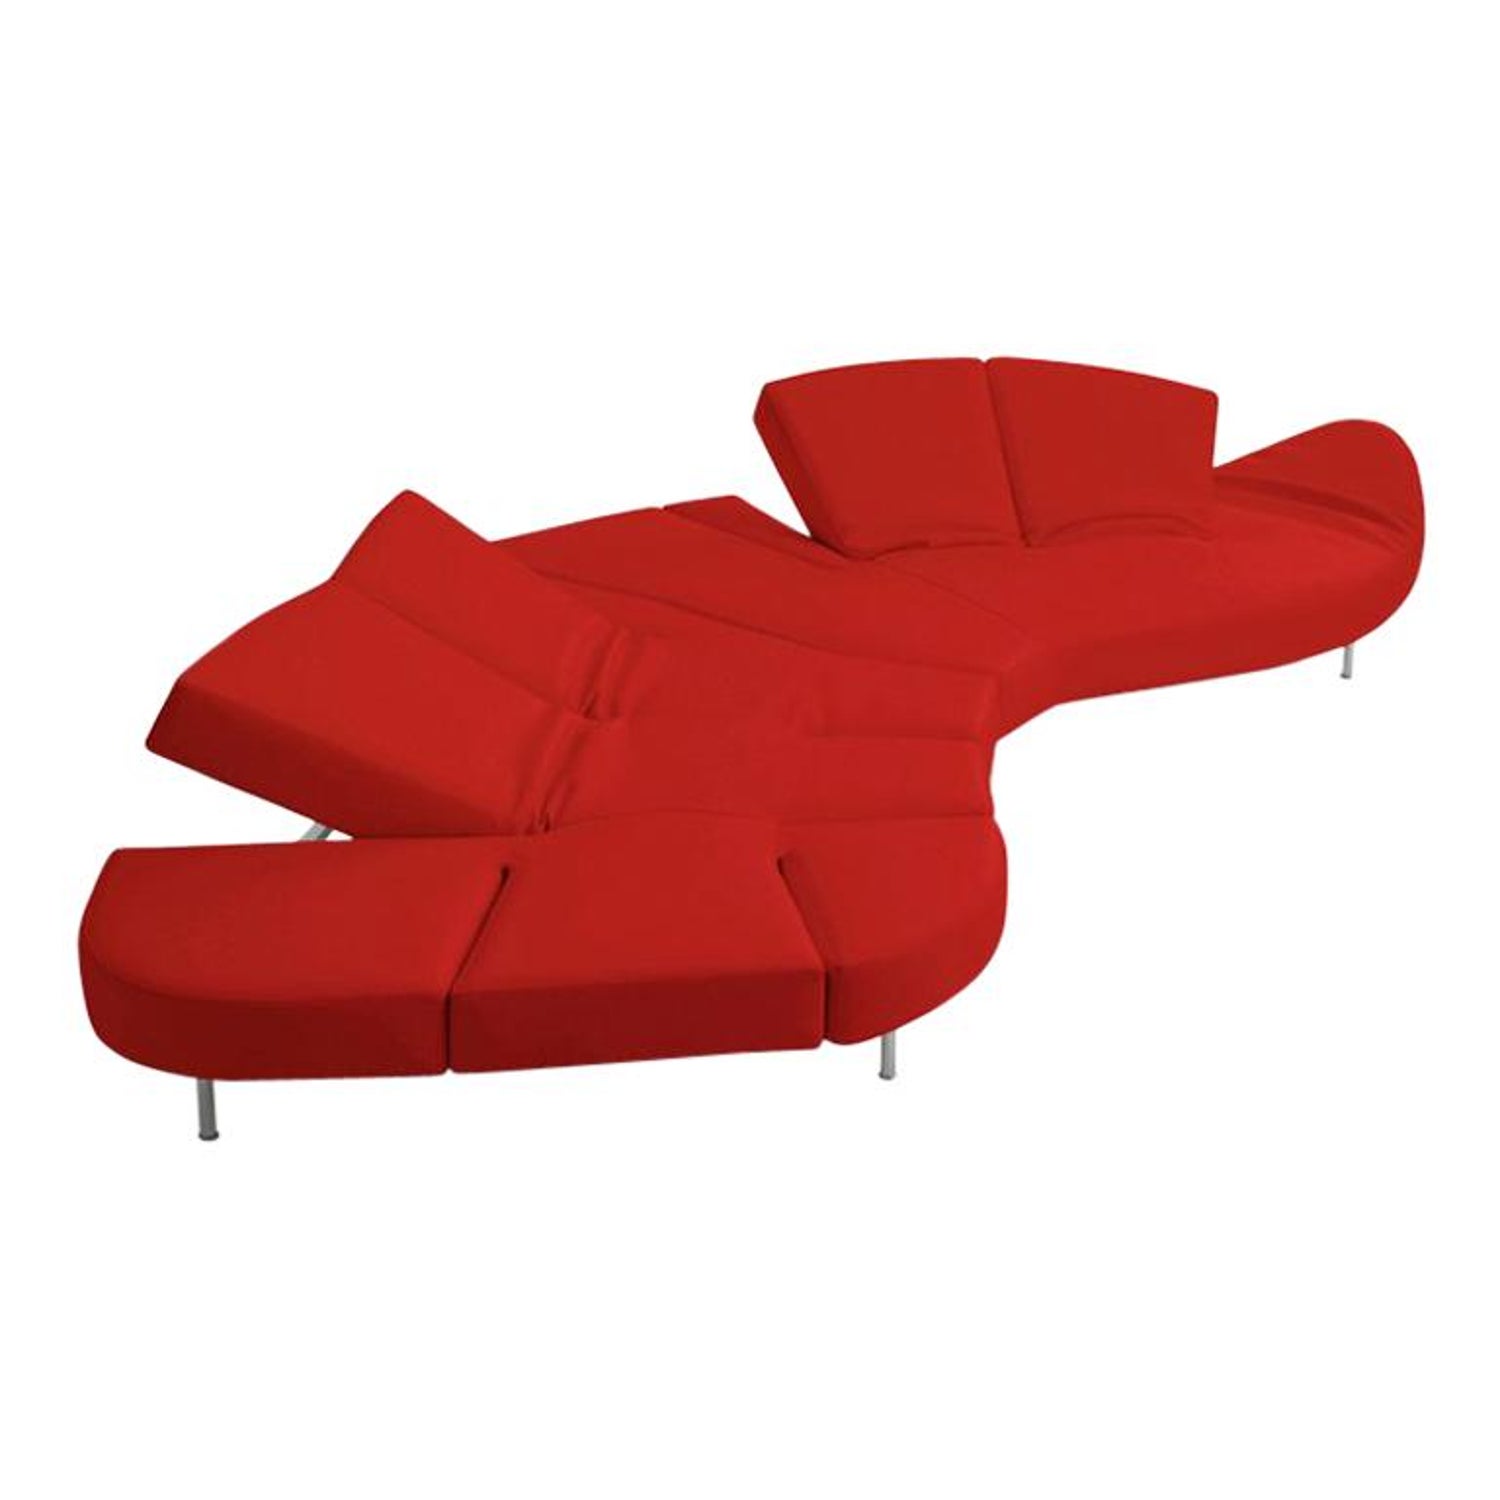 Reclining Red Leather Sofa Produced by Edra For Sale at 1stDibs